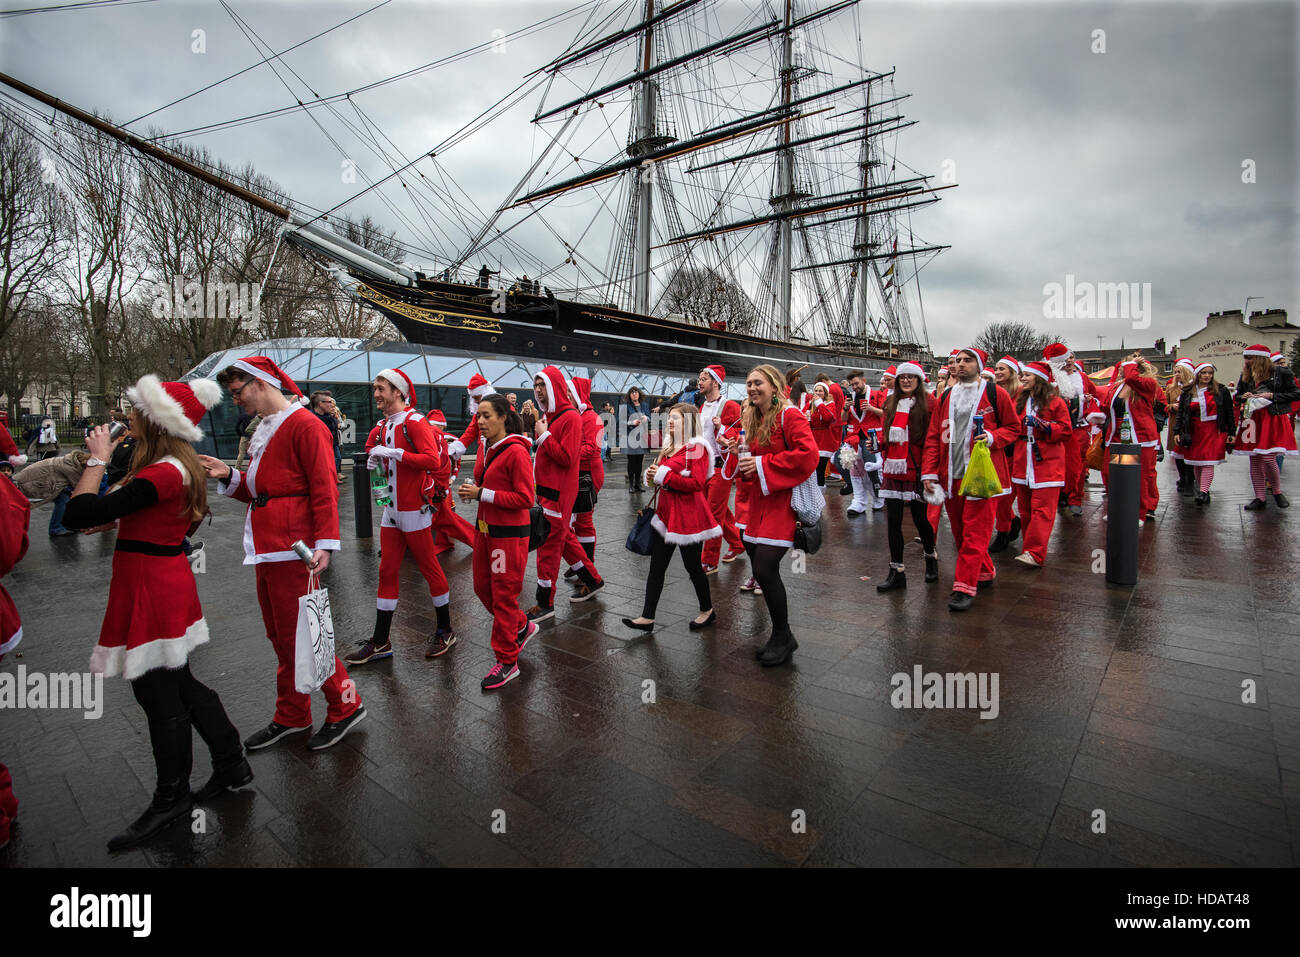 Santacon, Greenwich London England. 10 December 2016 seen here: Passing by the Cutty Sark Tea Clipper at Greenwich London England, hundreds of 'Santa's', men and women of all ages joined in this years Santacon ( Santa Convention) by dressing up as Santa and running and walking from various meeting points in and around London before congrgating for a mass Santacon meet up in Trafalgar Square.....for no other reason other to have some pre Christmas fun lubricated with a 'little' achohol. Credit:  BRIAN HARRIS/Alamy Live News Stock Photo